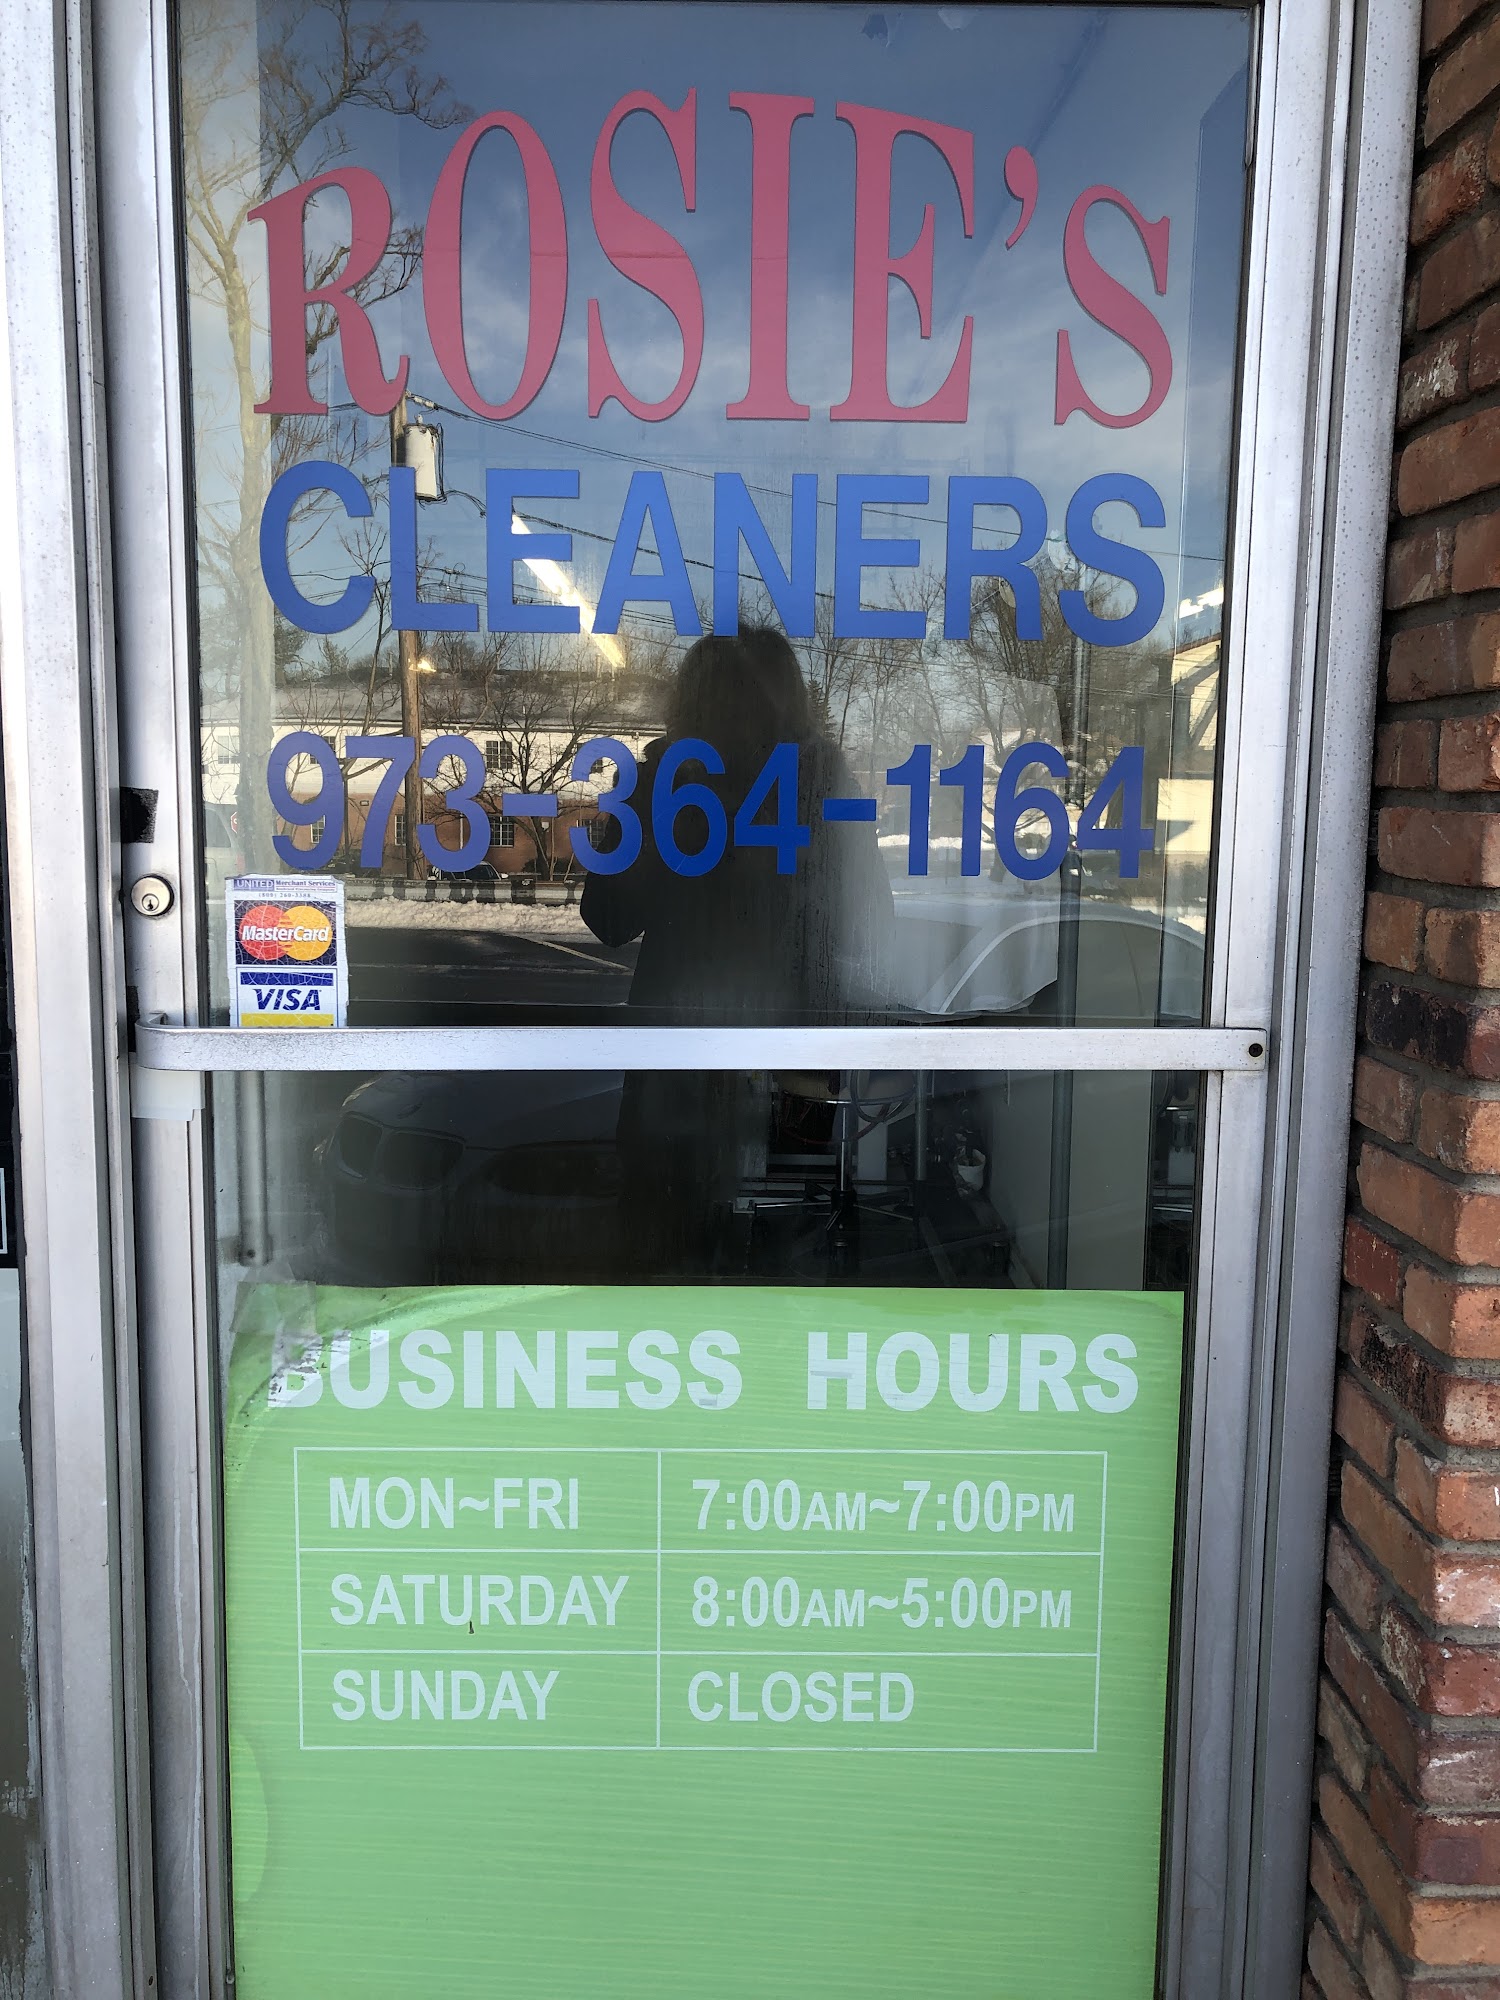 Rosies Dry Cleaning & Alterations 178 Eagle Rock Ave #5, Roseland New Jersey 07068